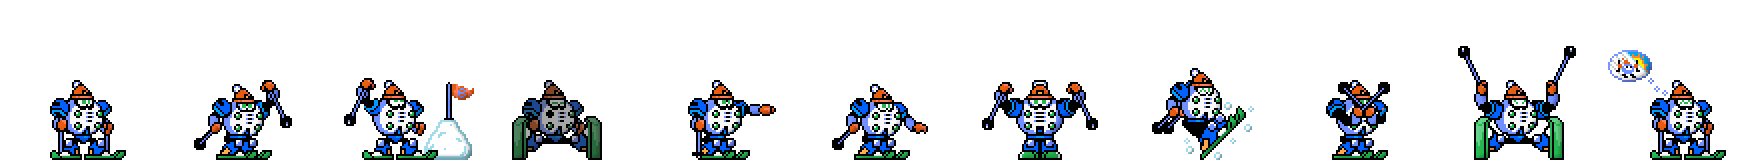 Blizzard Man | Base Sprite Right<div style="margin-top: 4px; letting-spacing: 1px; font-size: 90%; font-family: Courier New; color: rgb(159, 150, 172);">[robot:right:base]{blizzard-man}</div>